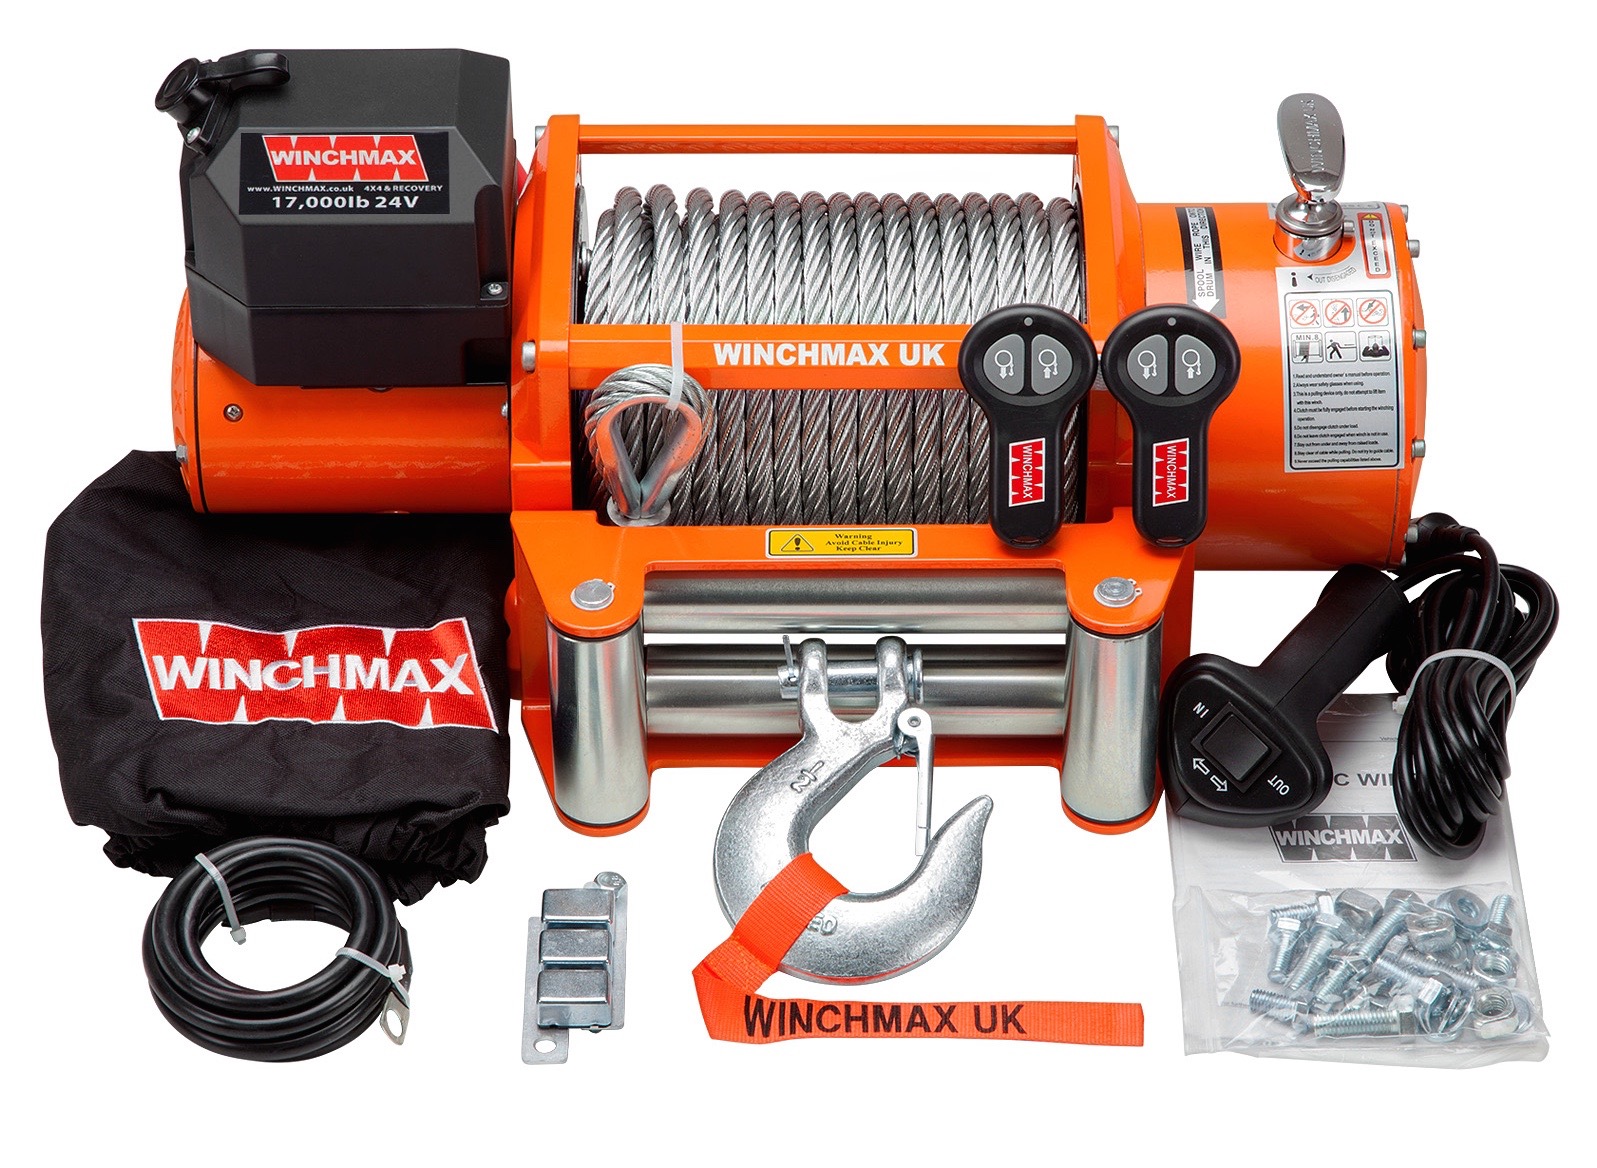 WINCHMAX 17000LB 24V ELECTRIC STEEL CABLE WINCH WITH WIRELESS REMOTES